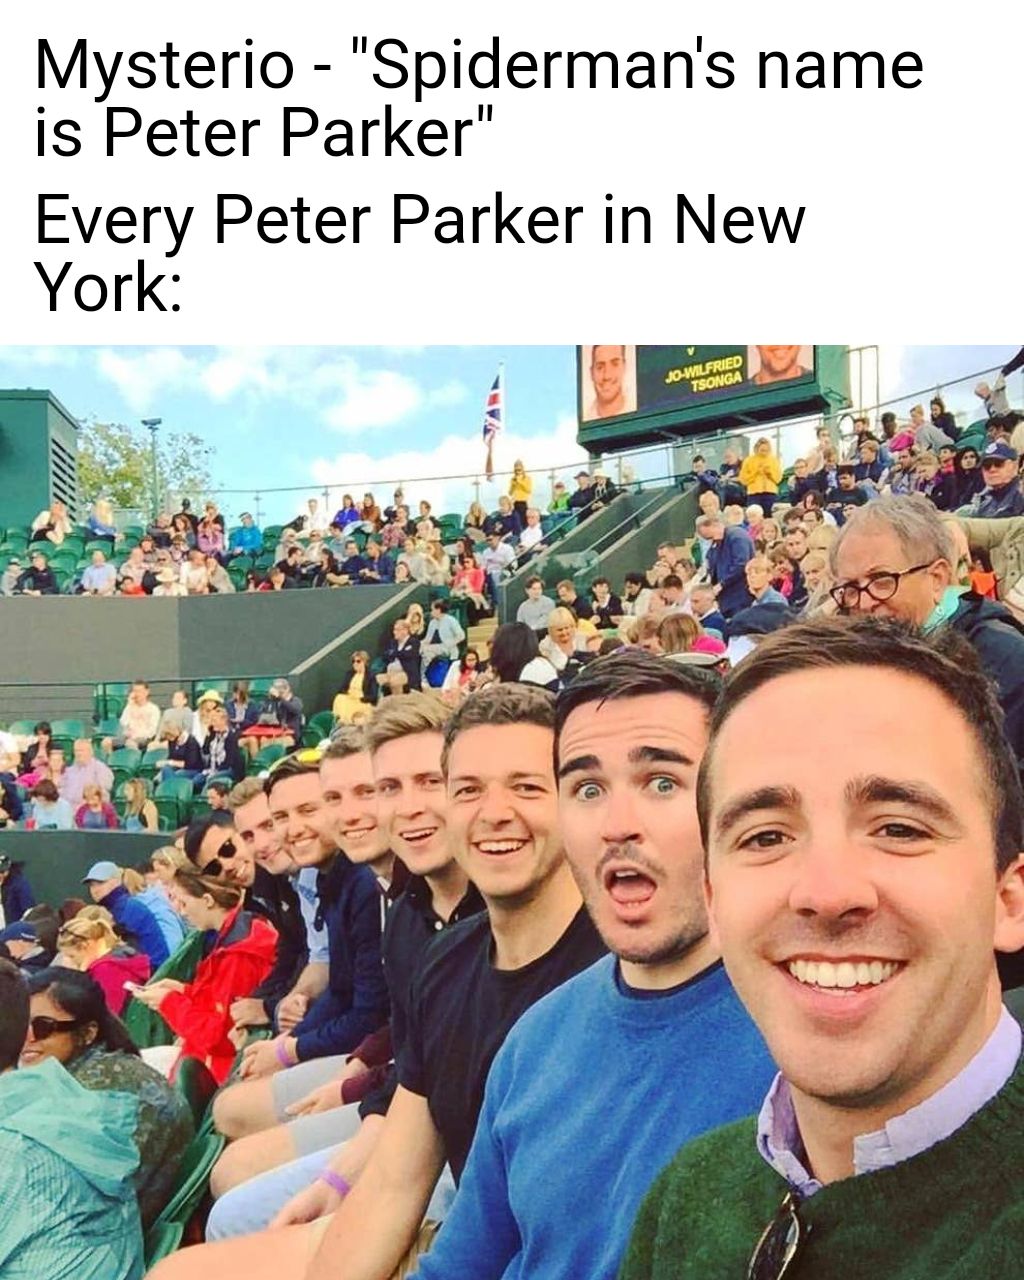 Apparently there's only one Peter Parker